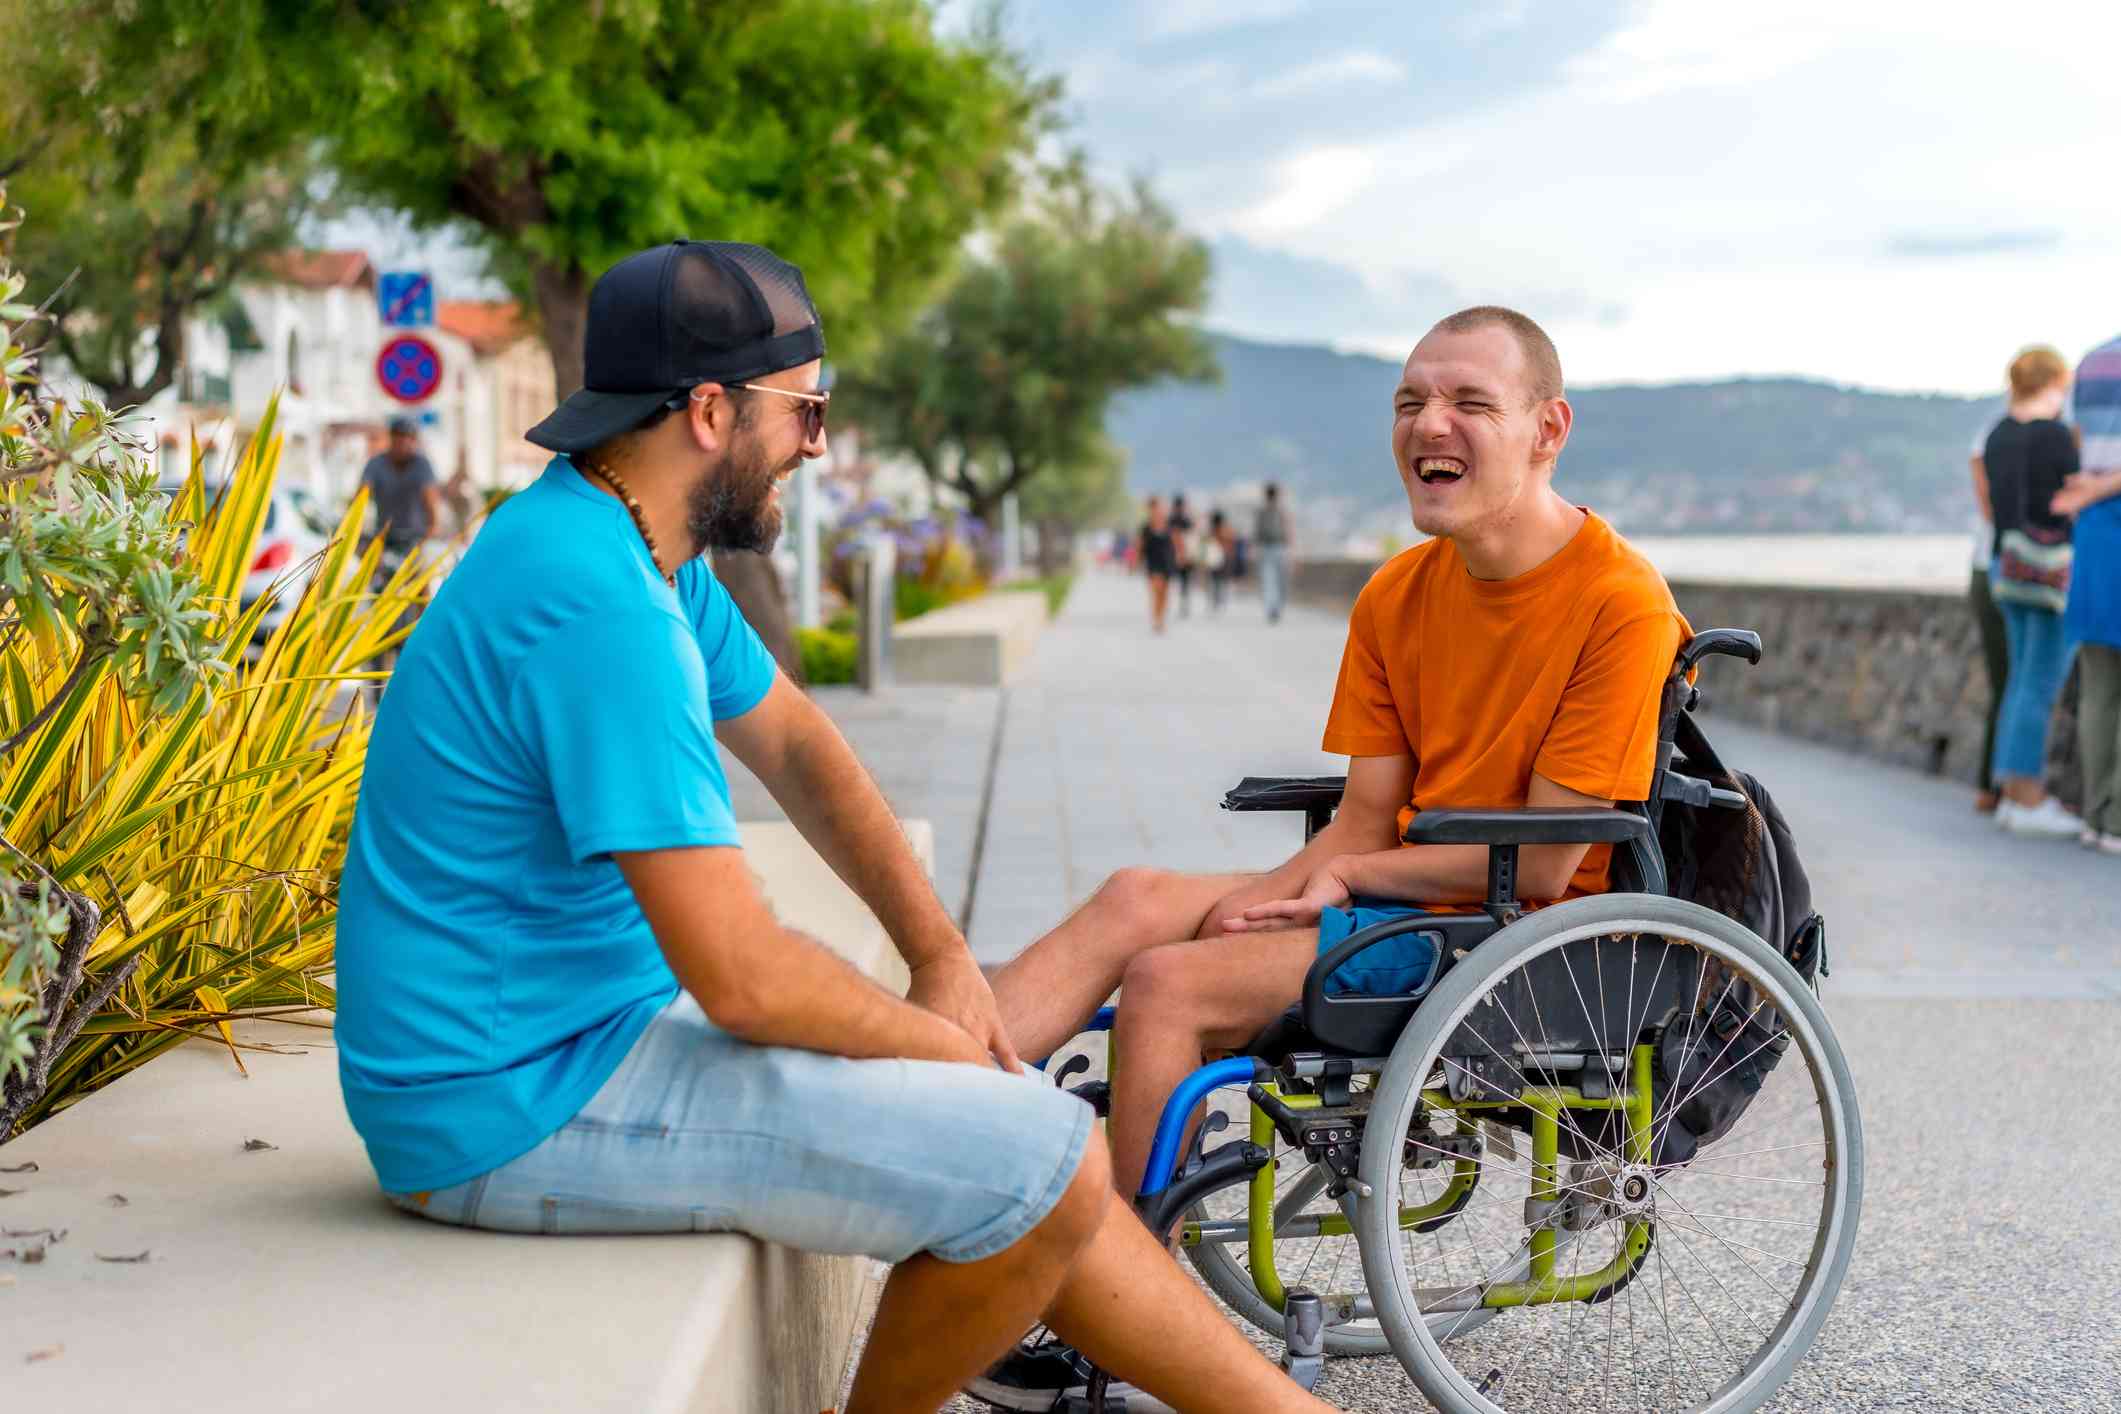 A man in a wheelchair and his male friend in a blue shirt sits outside together on a sunny day while chatting and smiling.